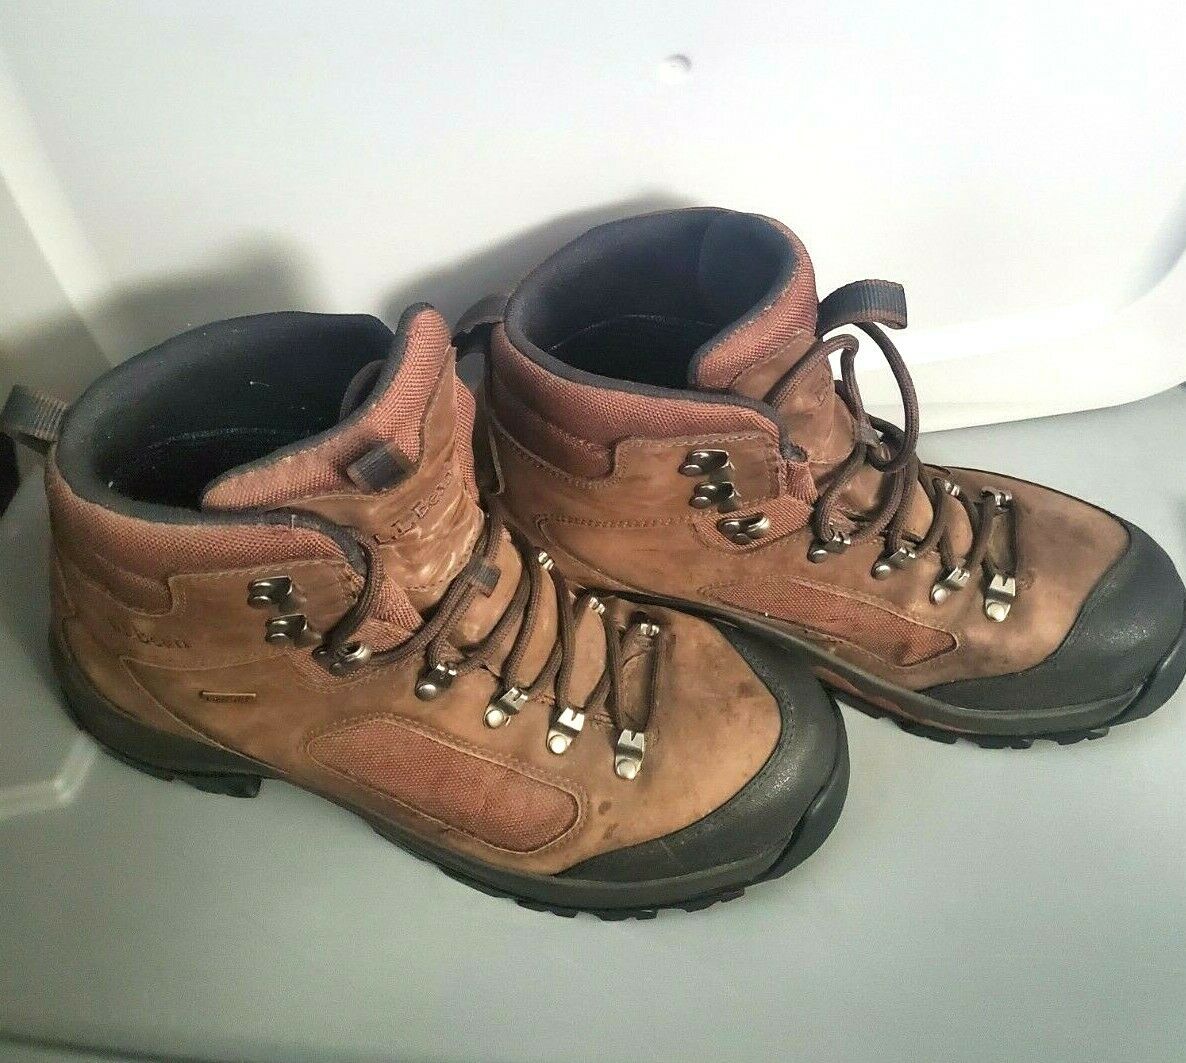 Men's LL Bean Gore-Tex Brown Leather Hiking Boots with Vibram Soles Size 12M